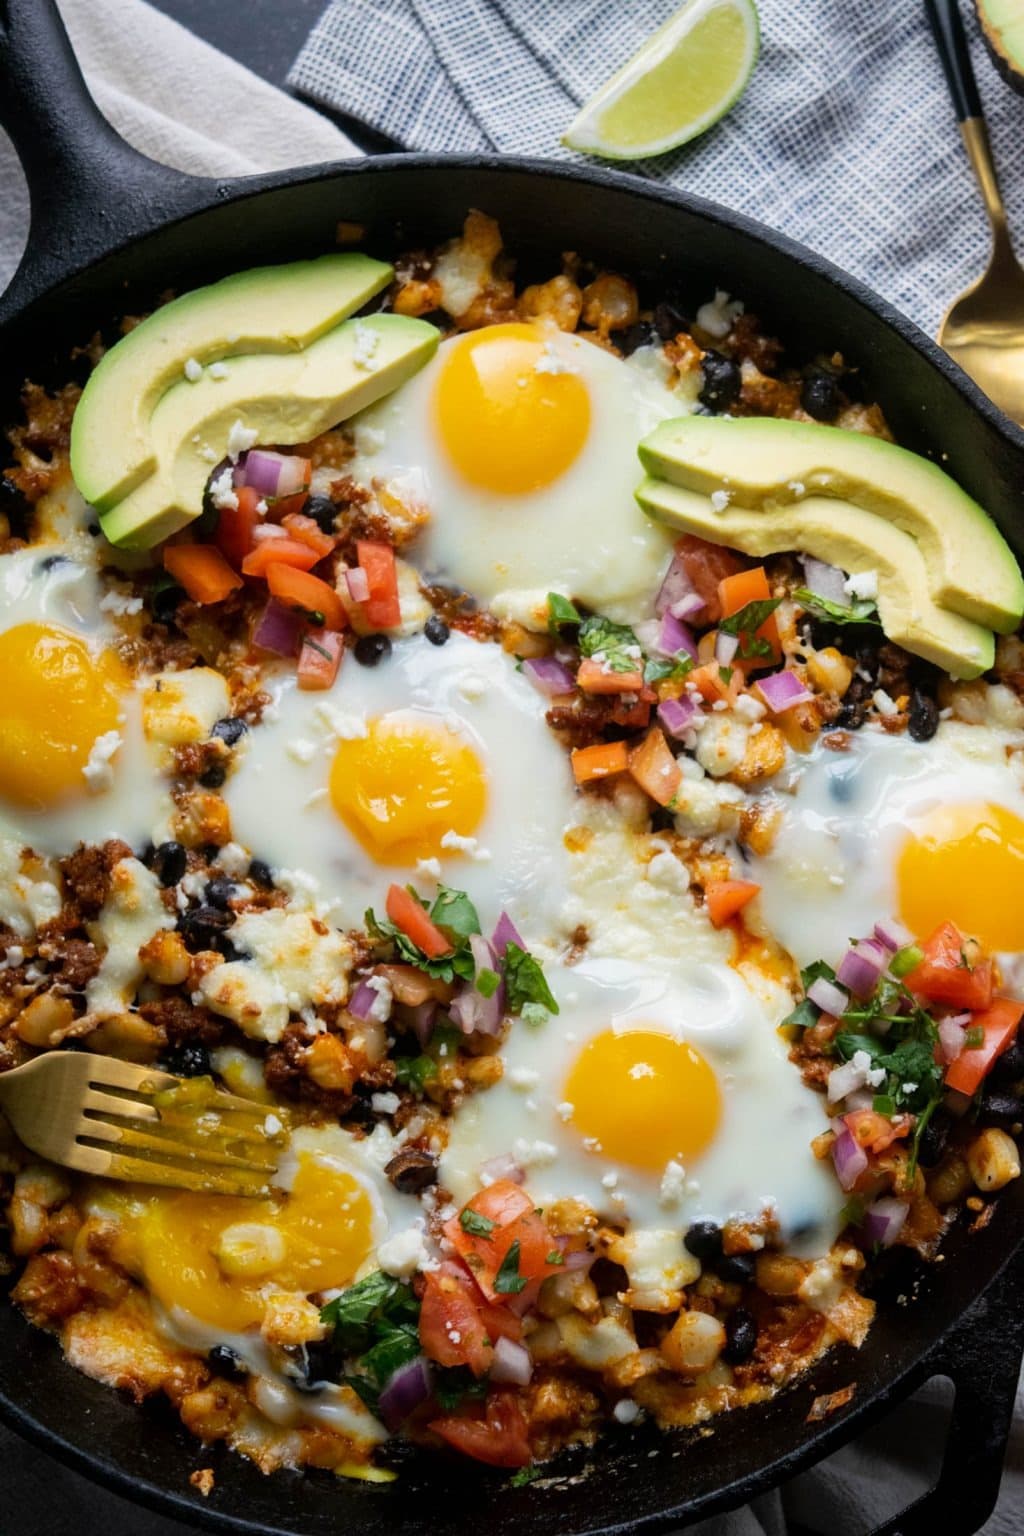 Breakfast casserole cooked in skillet loaded with sliced avocado, chorizo, hominy, black beans, and eggs.